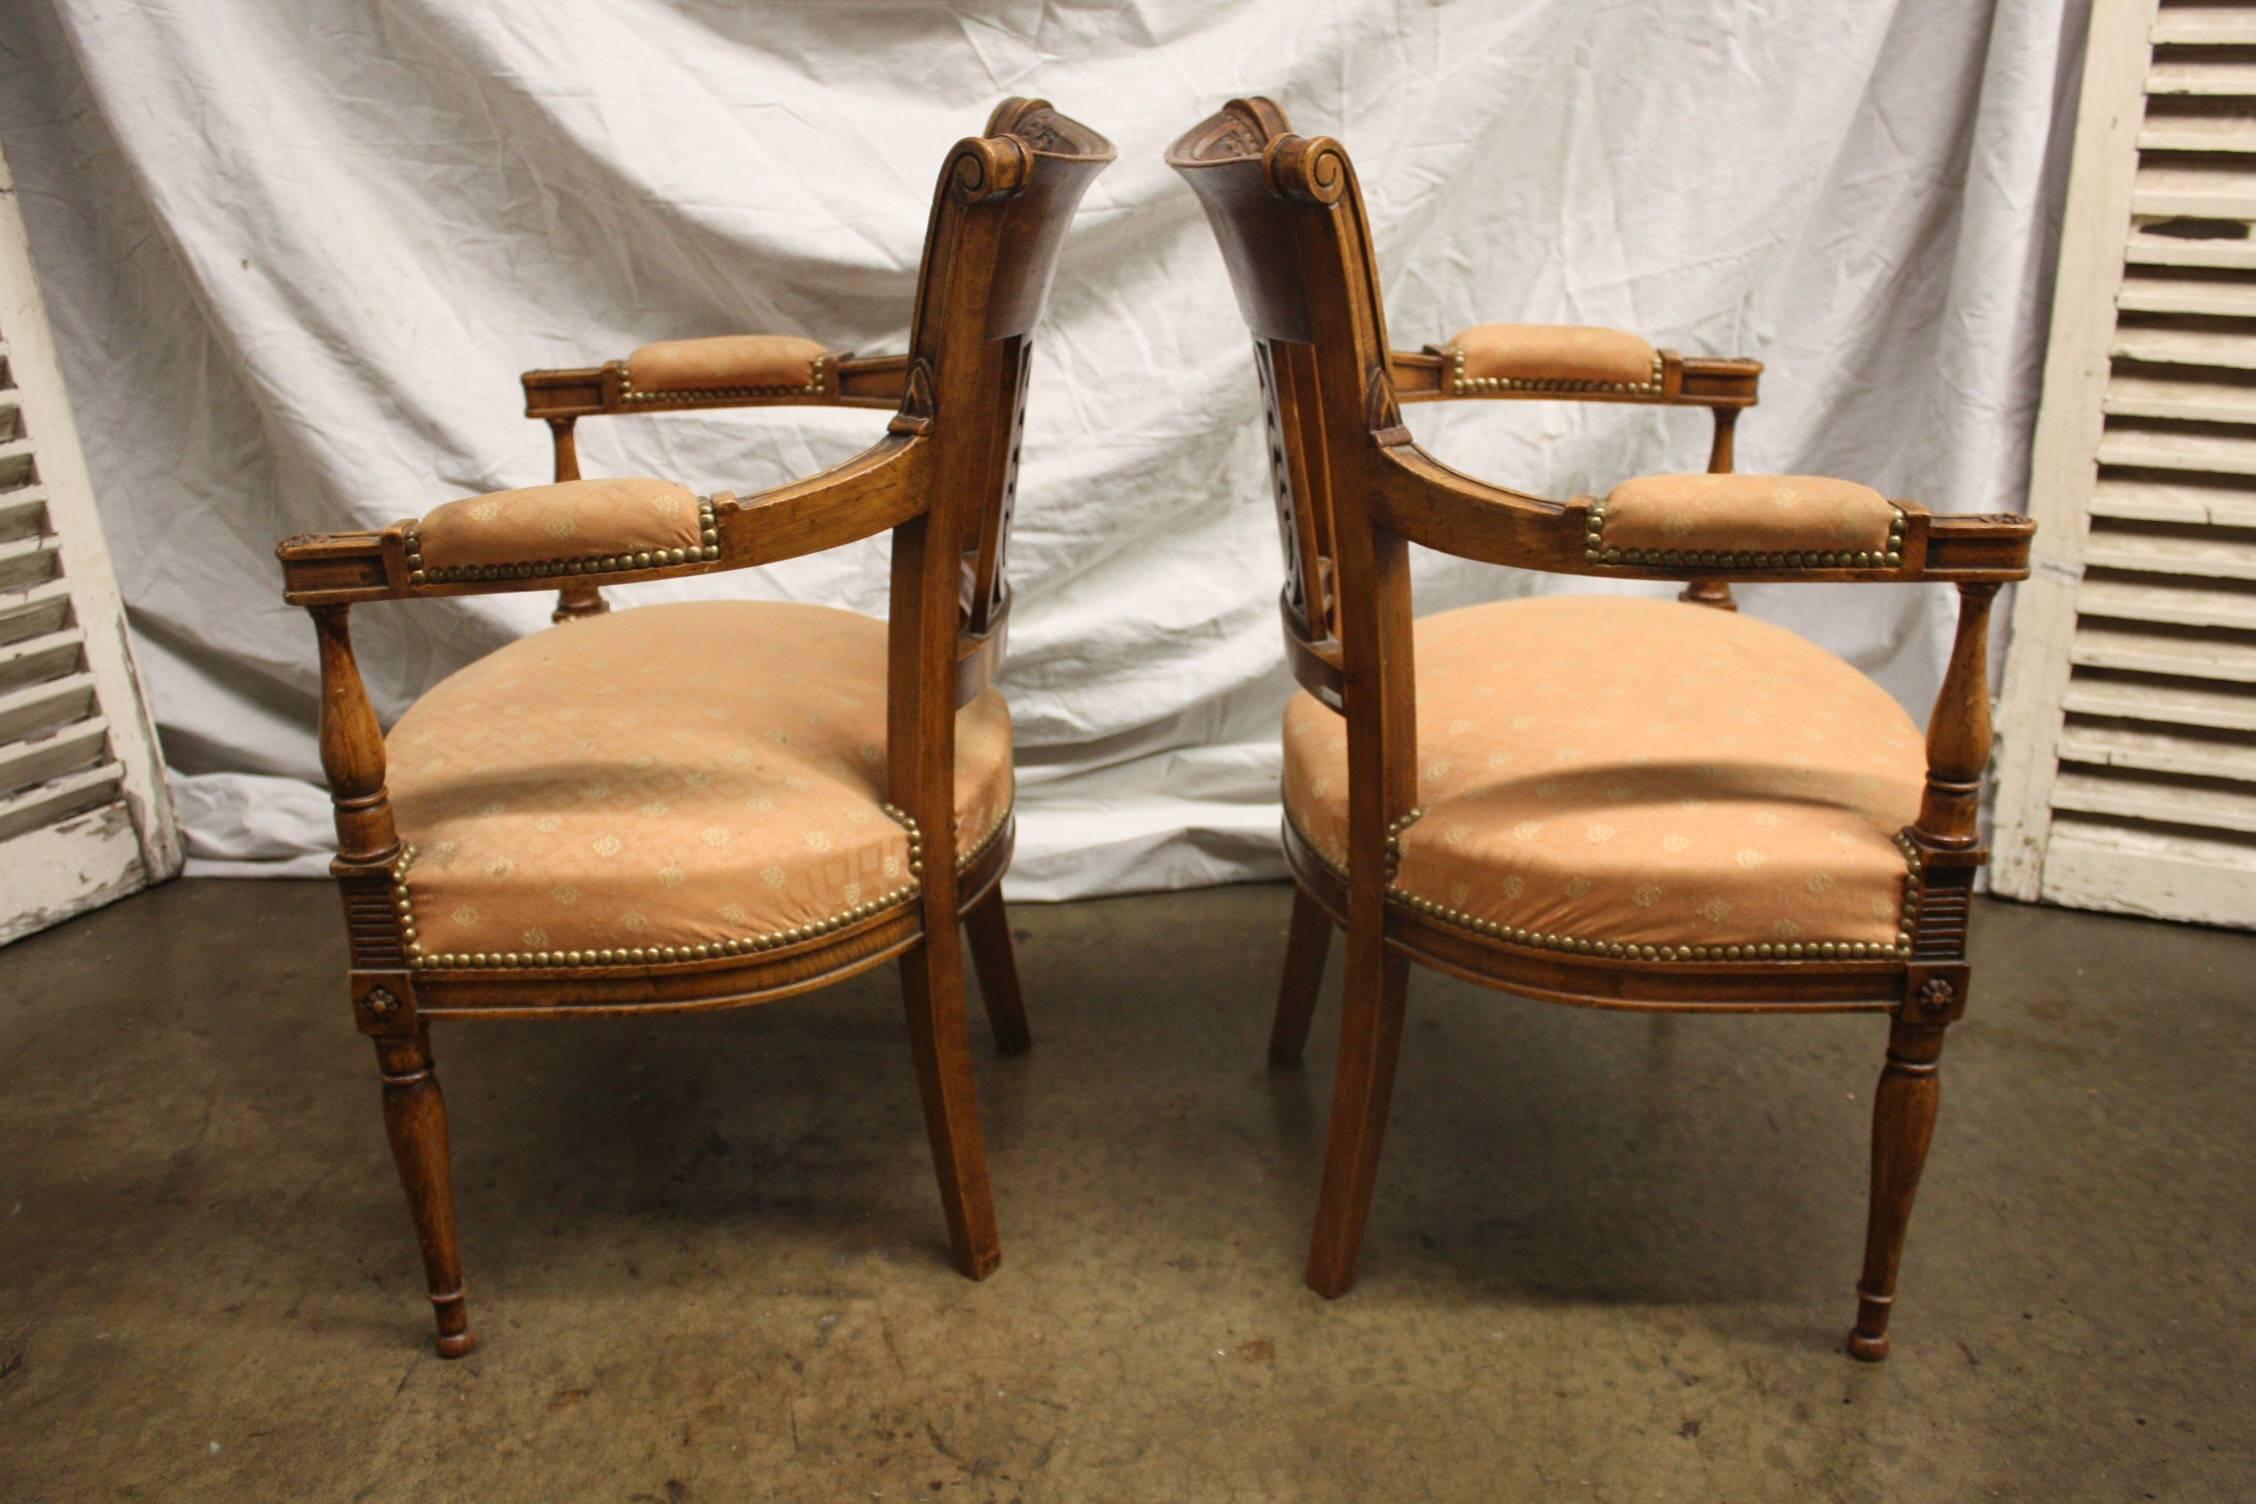 Beautiful Pair of 19th Century French Armchairs In Good Condition For Sale In Stockbridge, GA